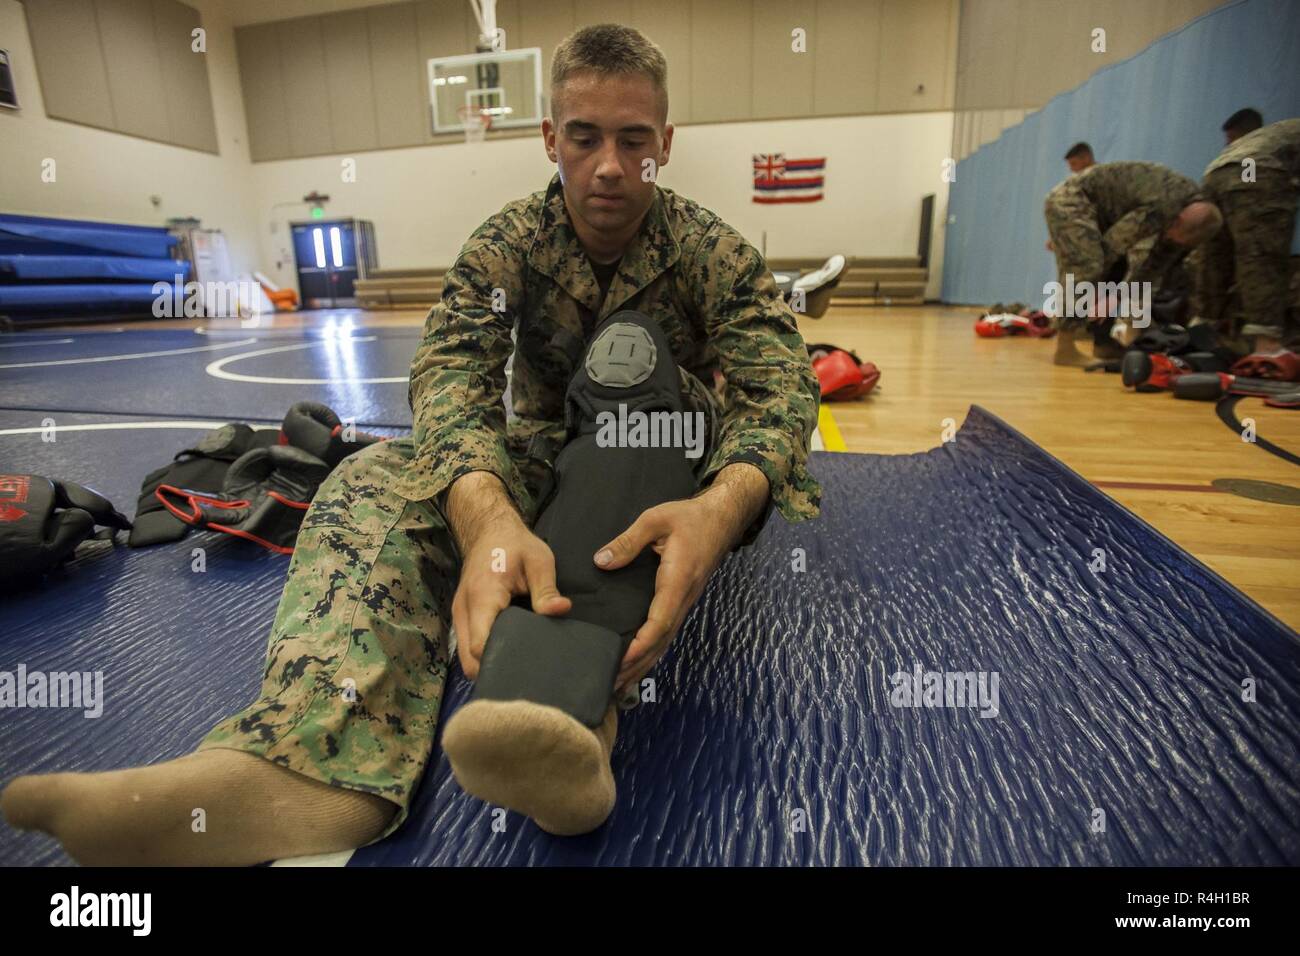 A U.S. Marine puts on protective equipment prior to a Marine Corps Martial Arts Instructors Course (MAIC) physical training session, Marine Corps Base Hawaii, Sept. 20, 2018. MAIC is a course that ensures Marines can properly instruct others so they can advance their belt level. Stock Photo